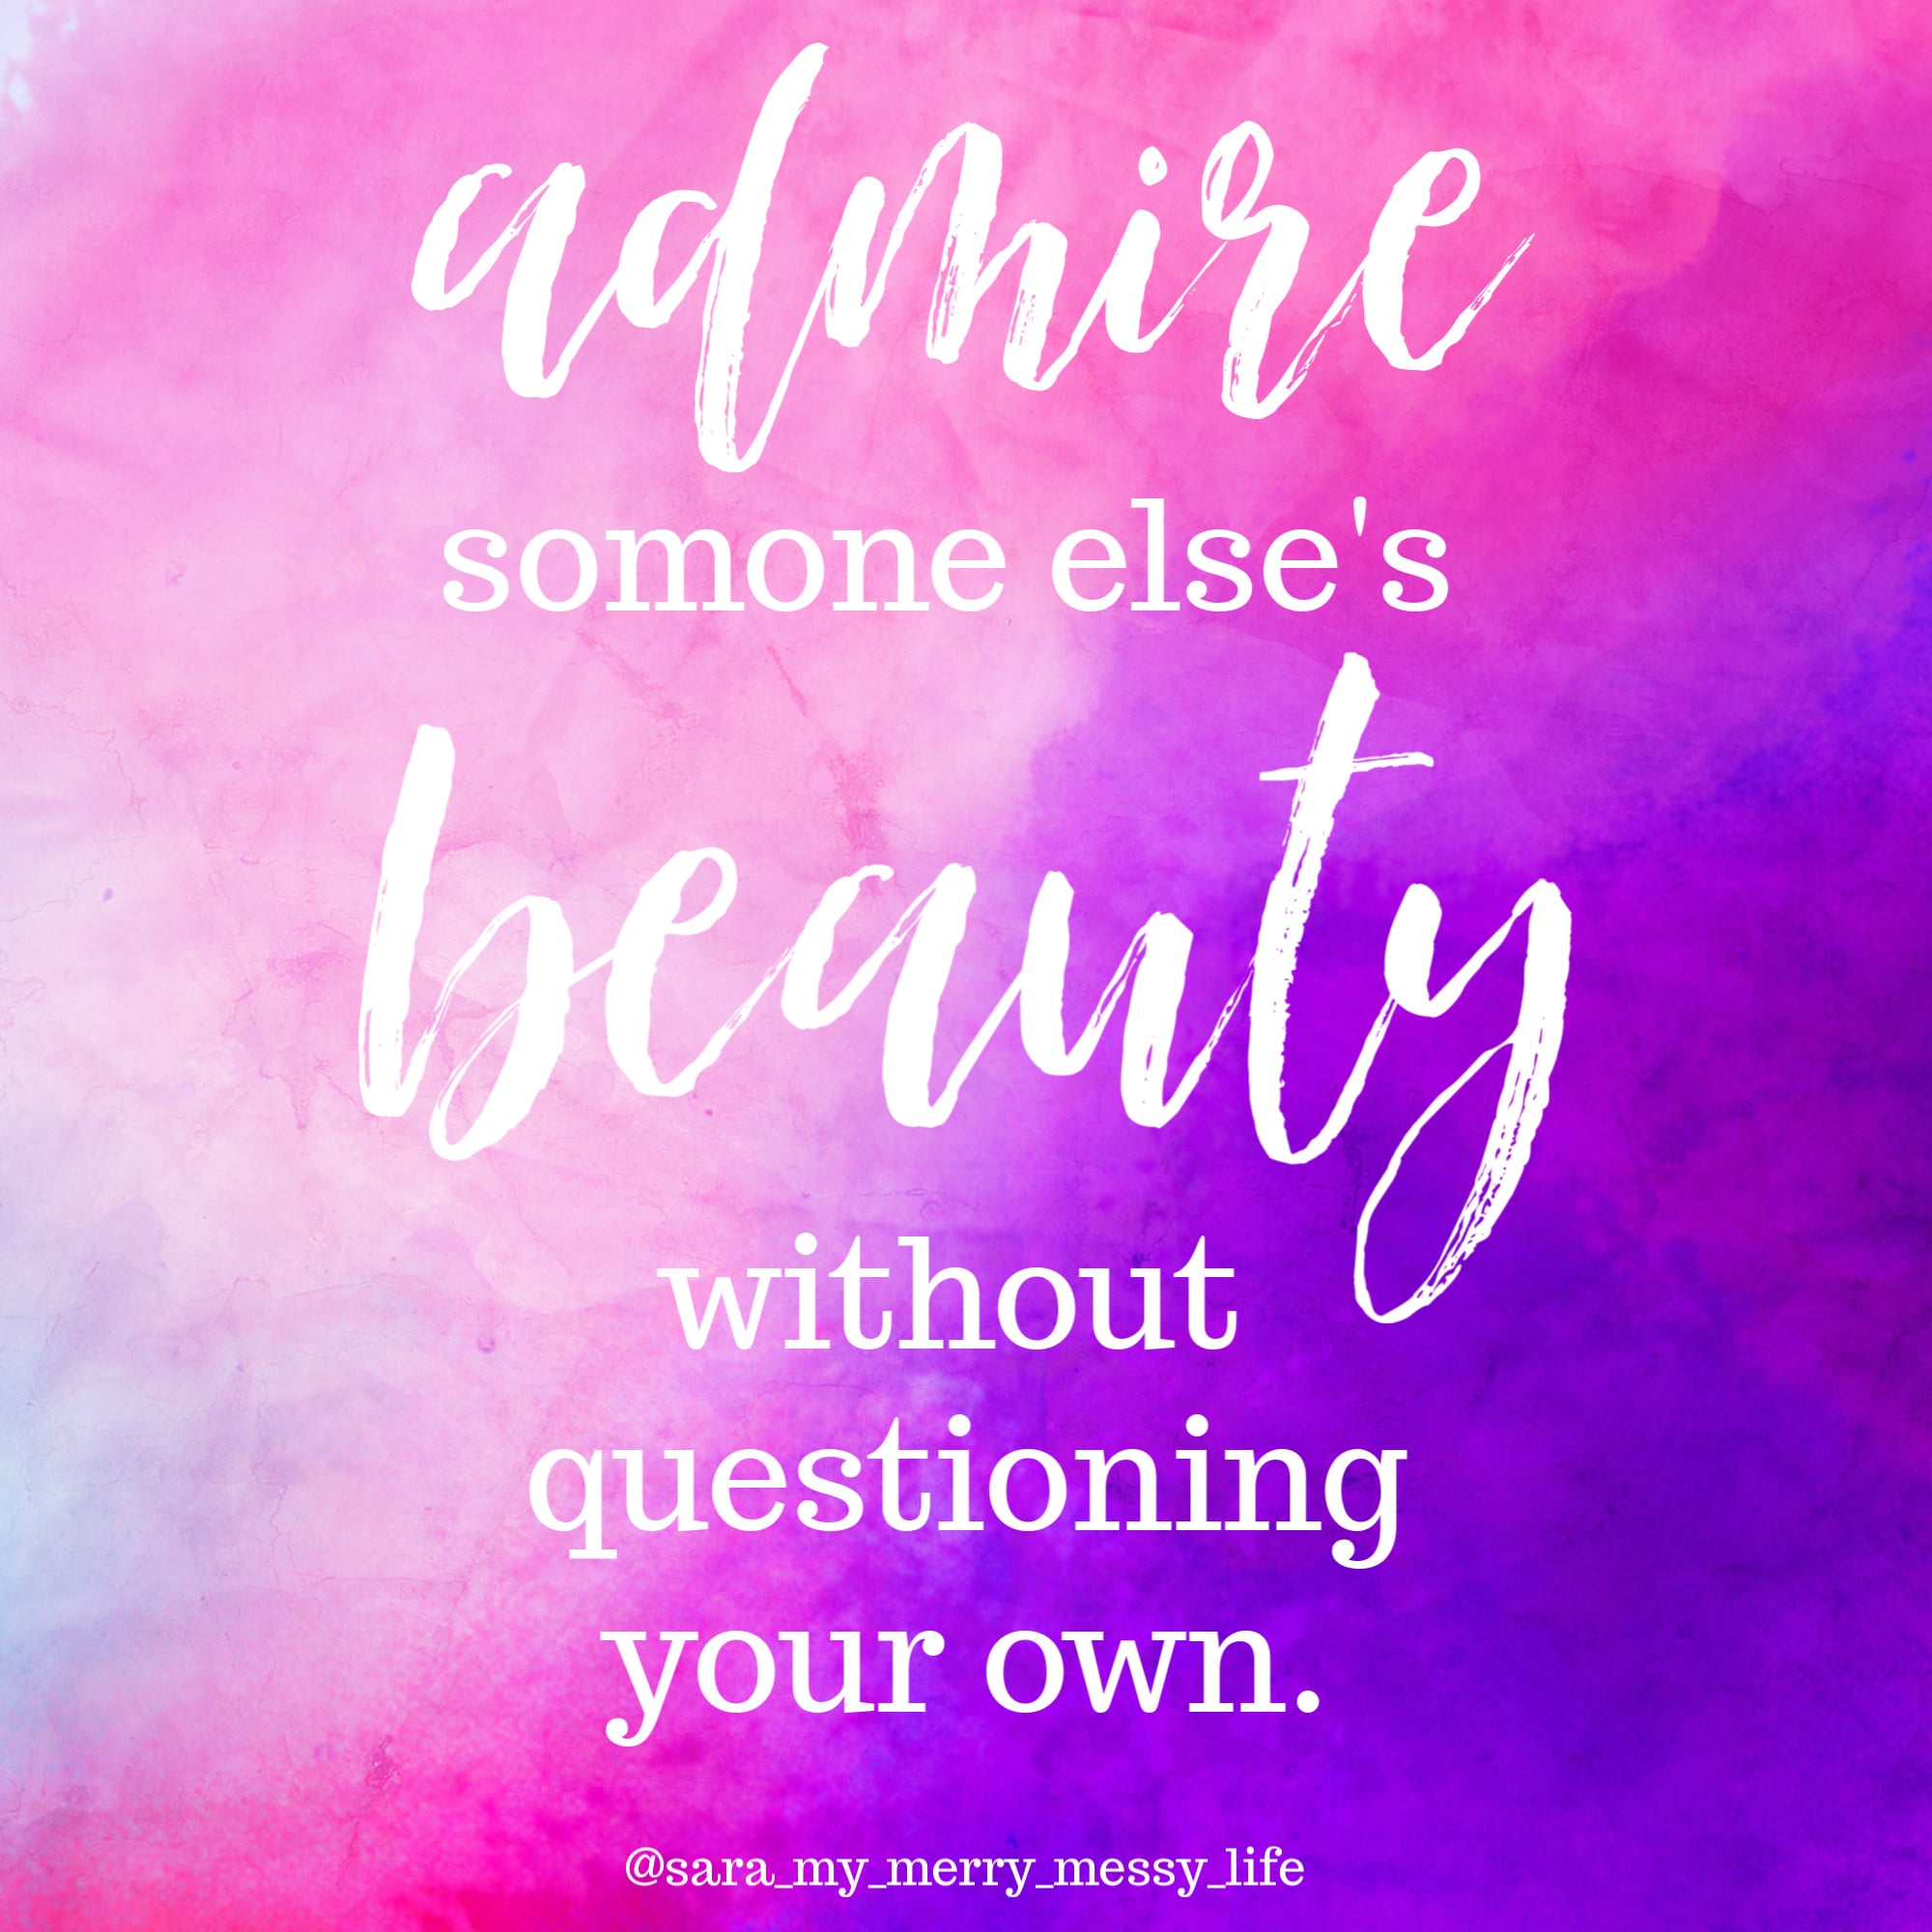 Admire someone else's beauty without questioning your own. 